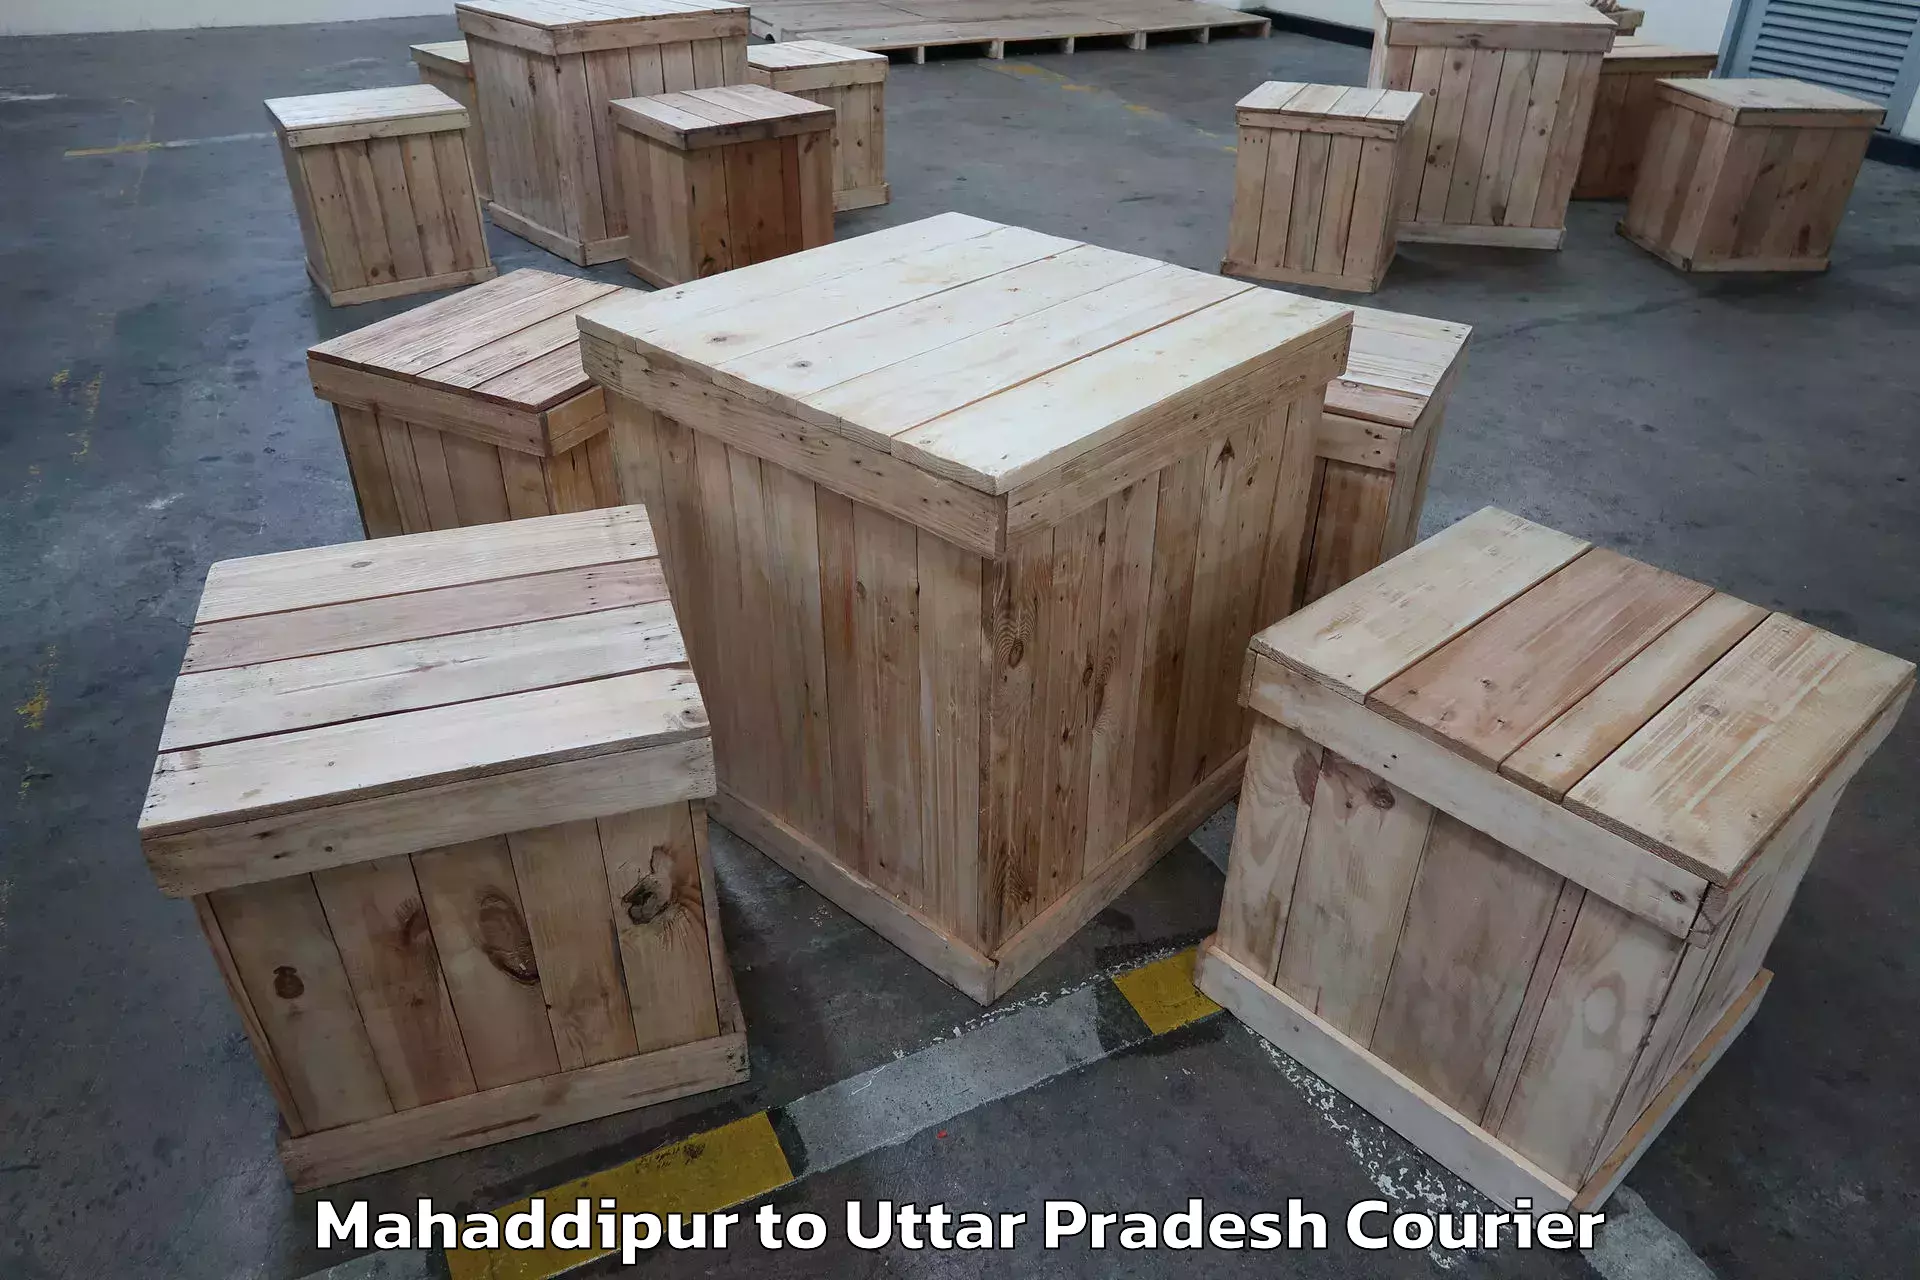 Furniture moving assistance Mahaddipur to Sitapur